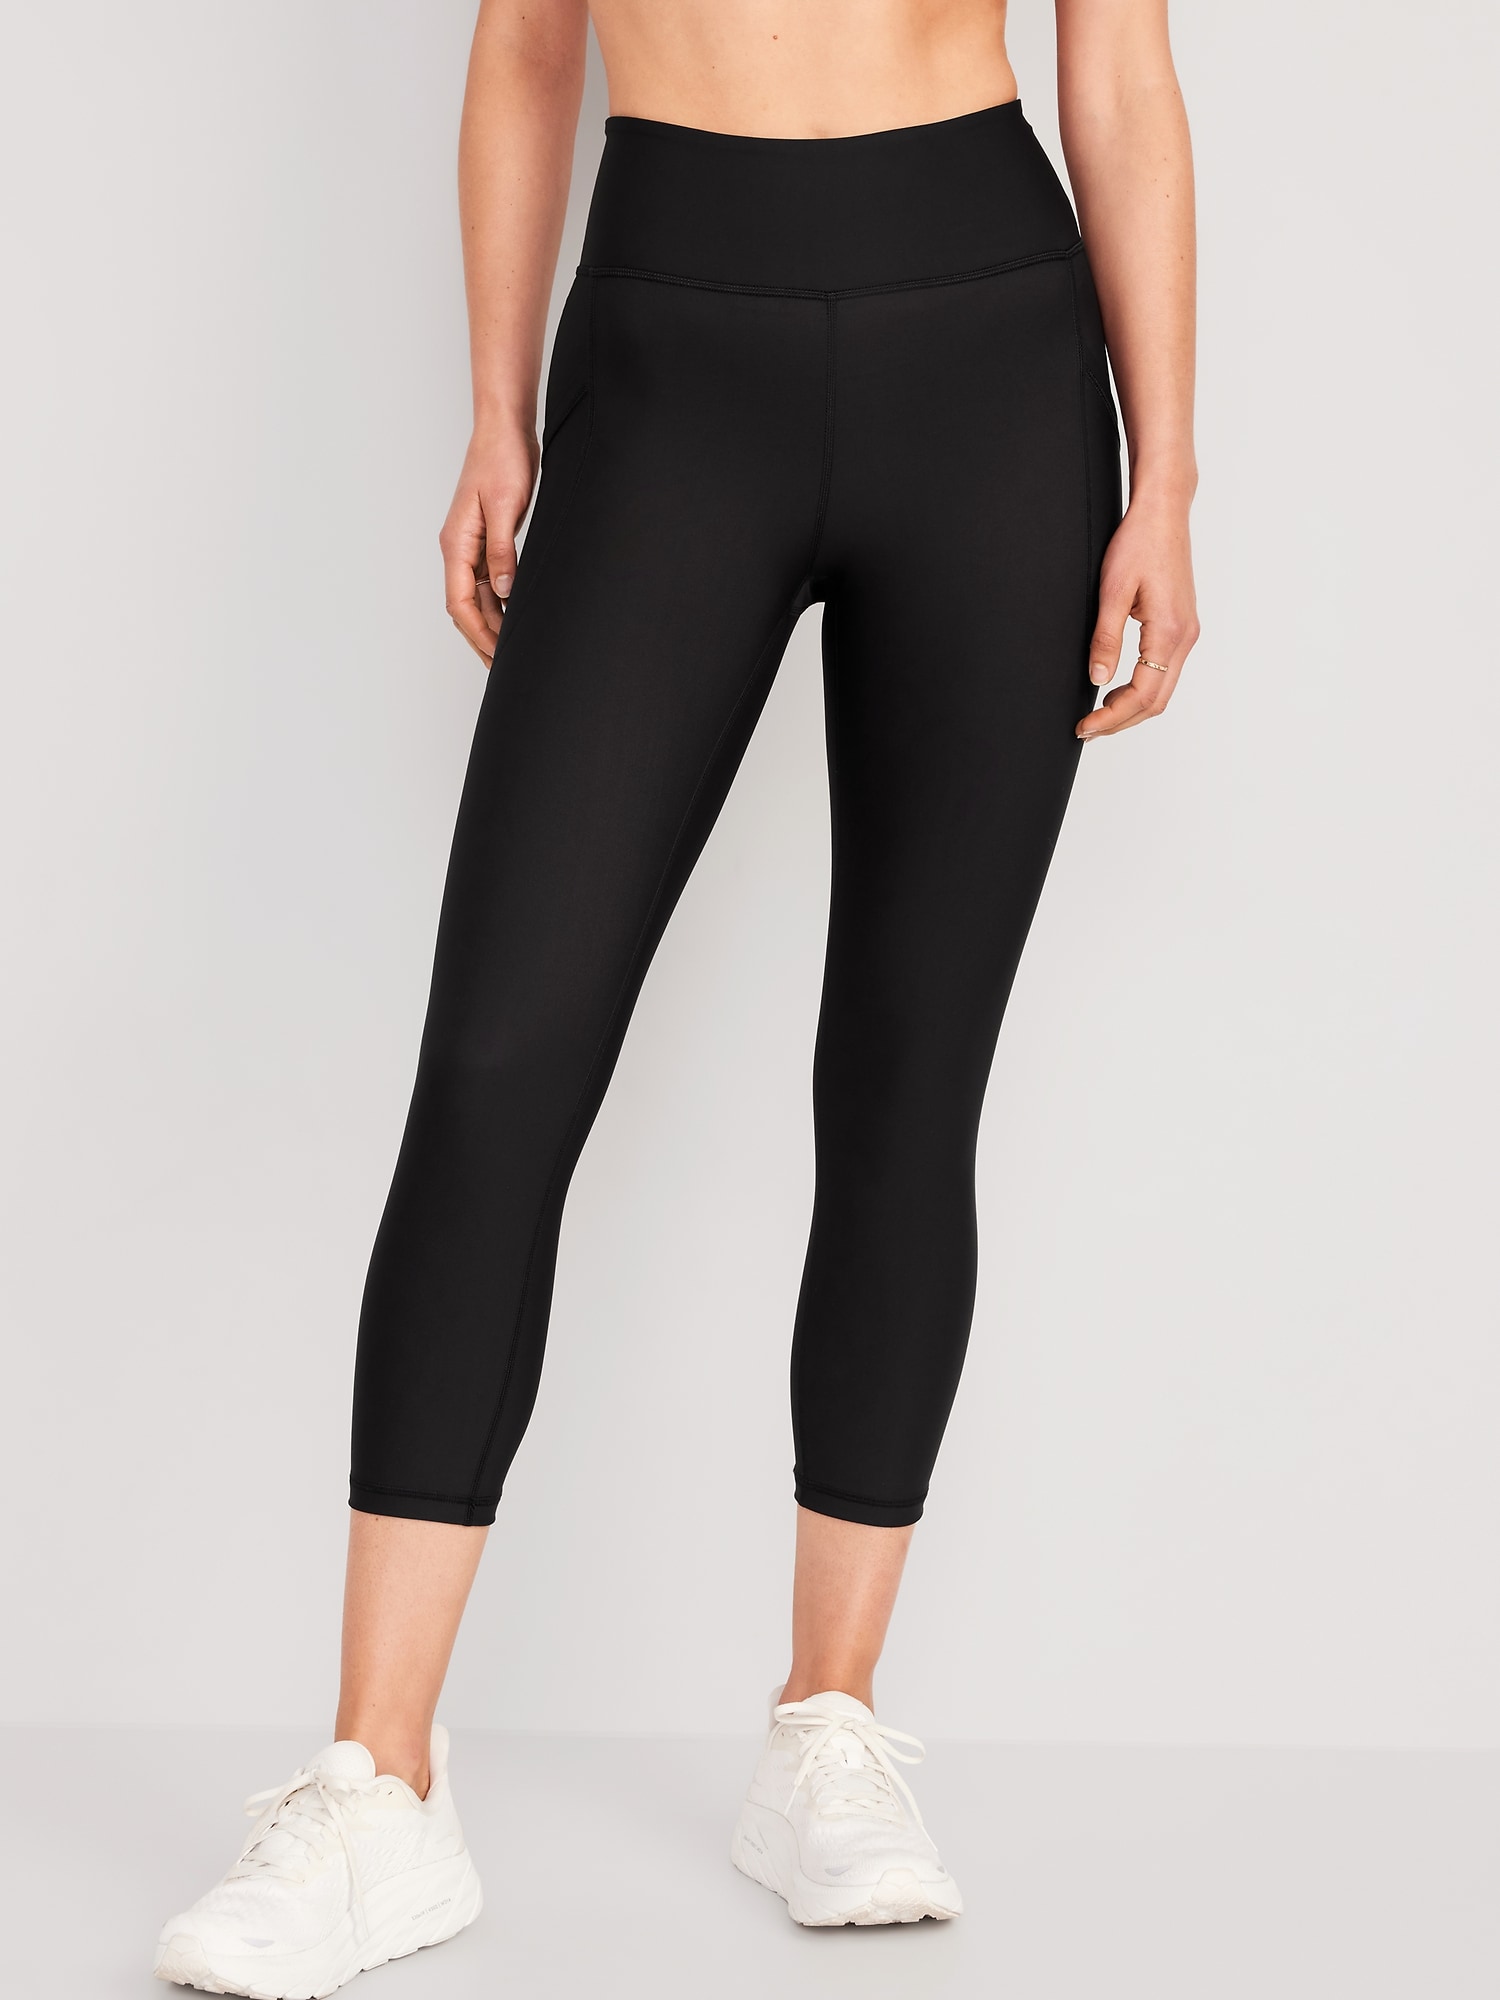 Extra High-Waisted Cloud+ Crop Leggings for Women -- 16-inch inseam